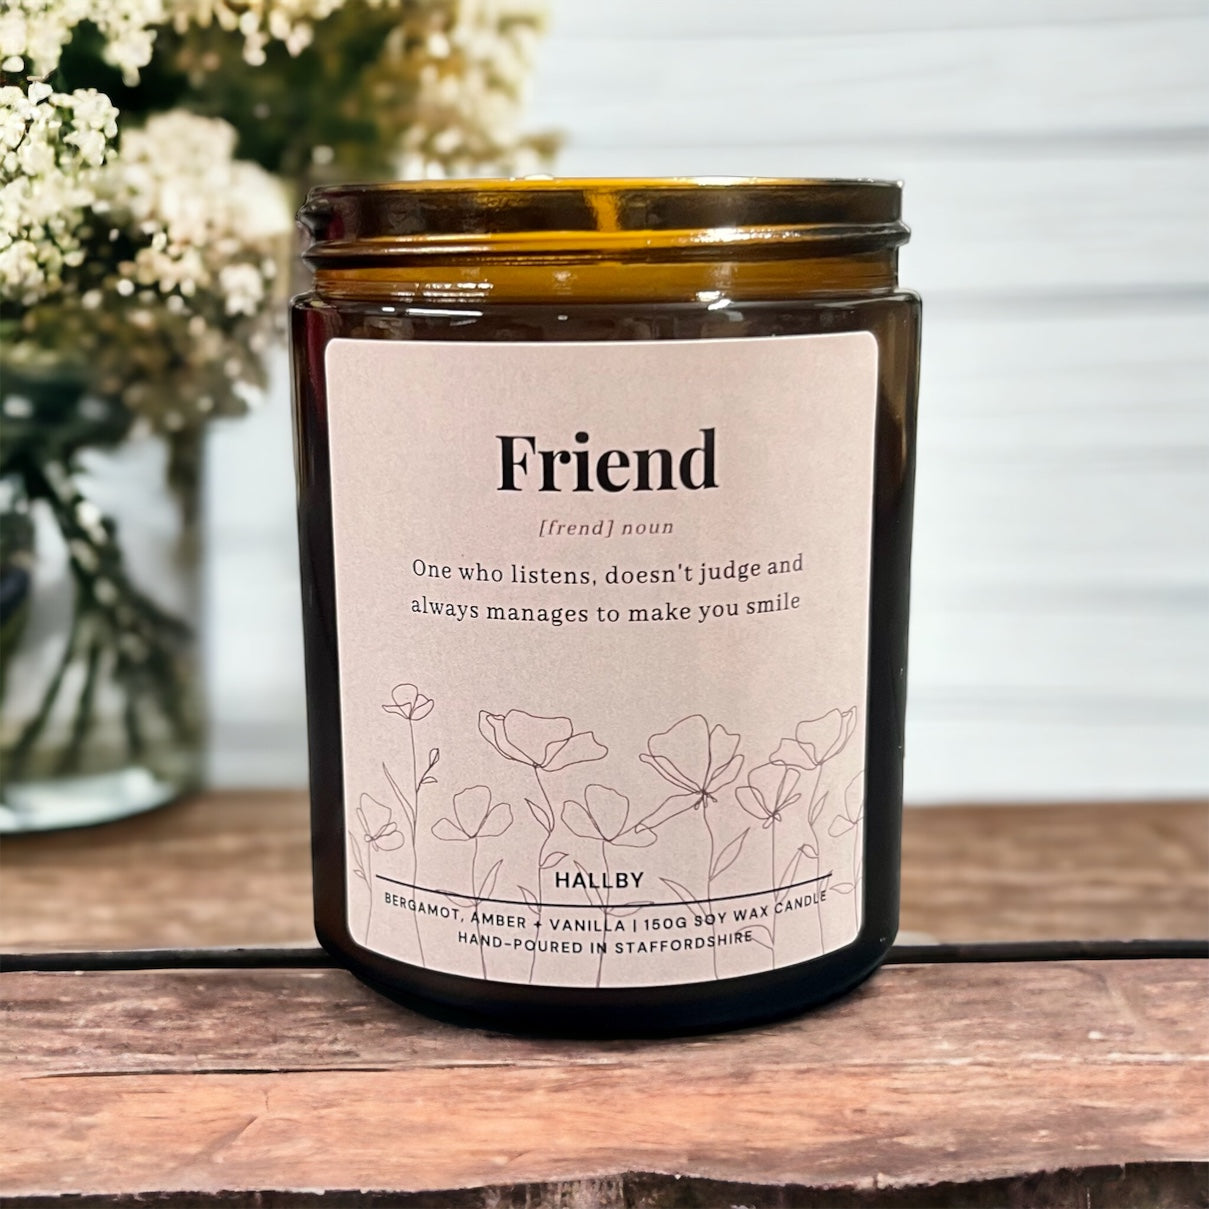 Candle and Coaster Gift for friend Friend gift Friend treat Friend gift box birthday gift candle Friend candle